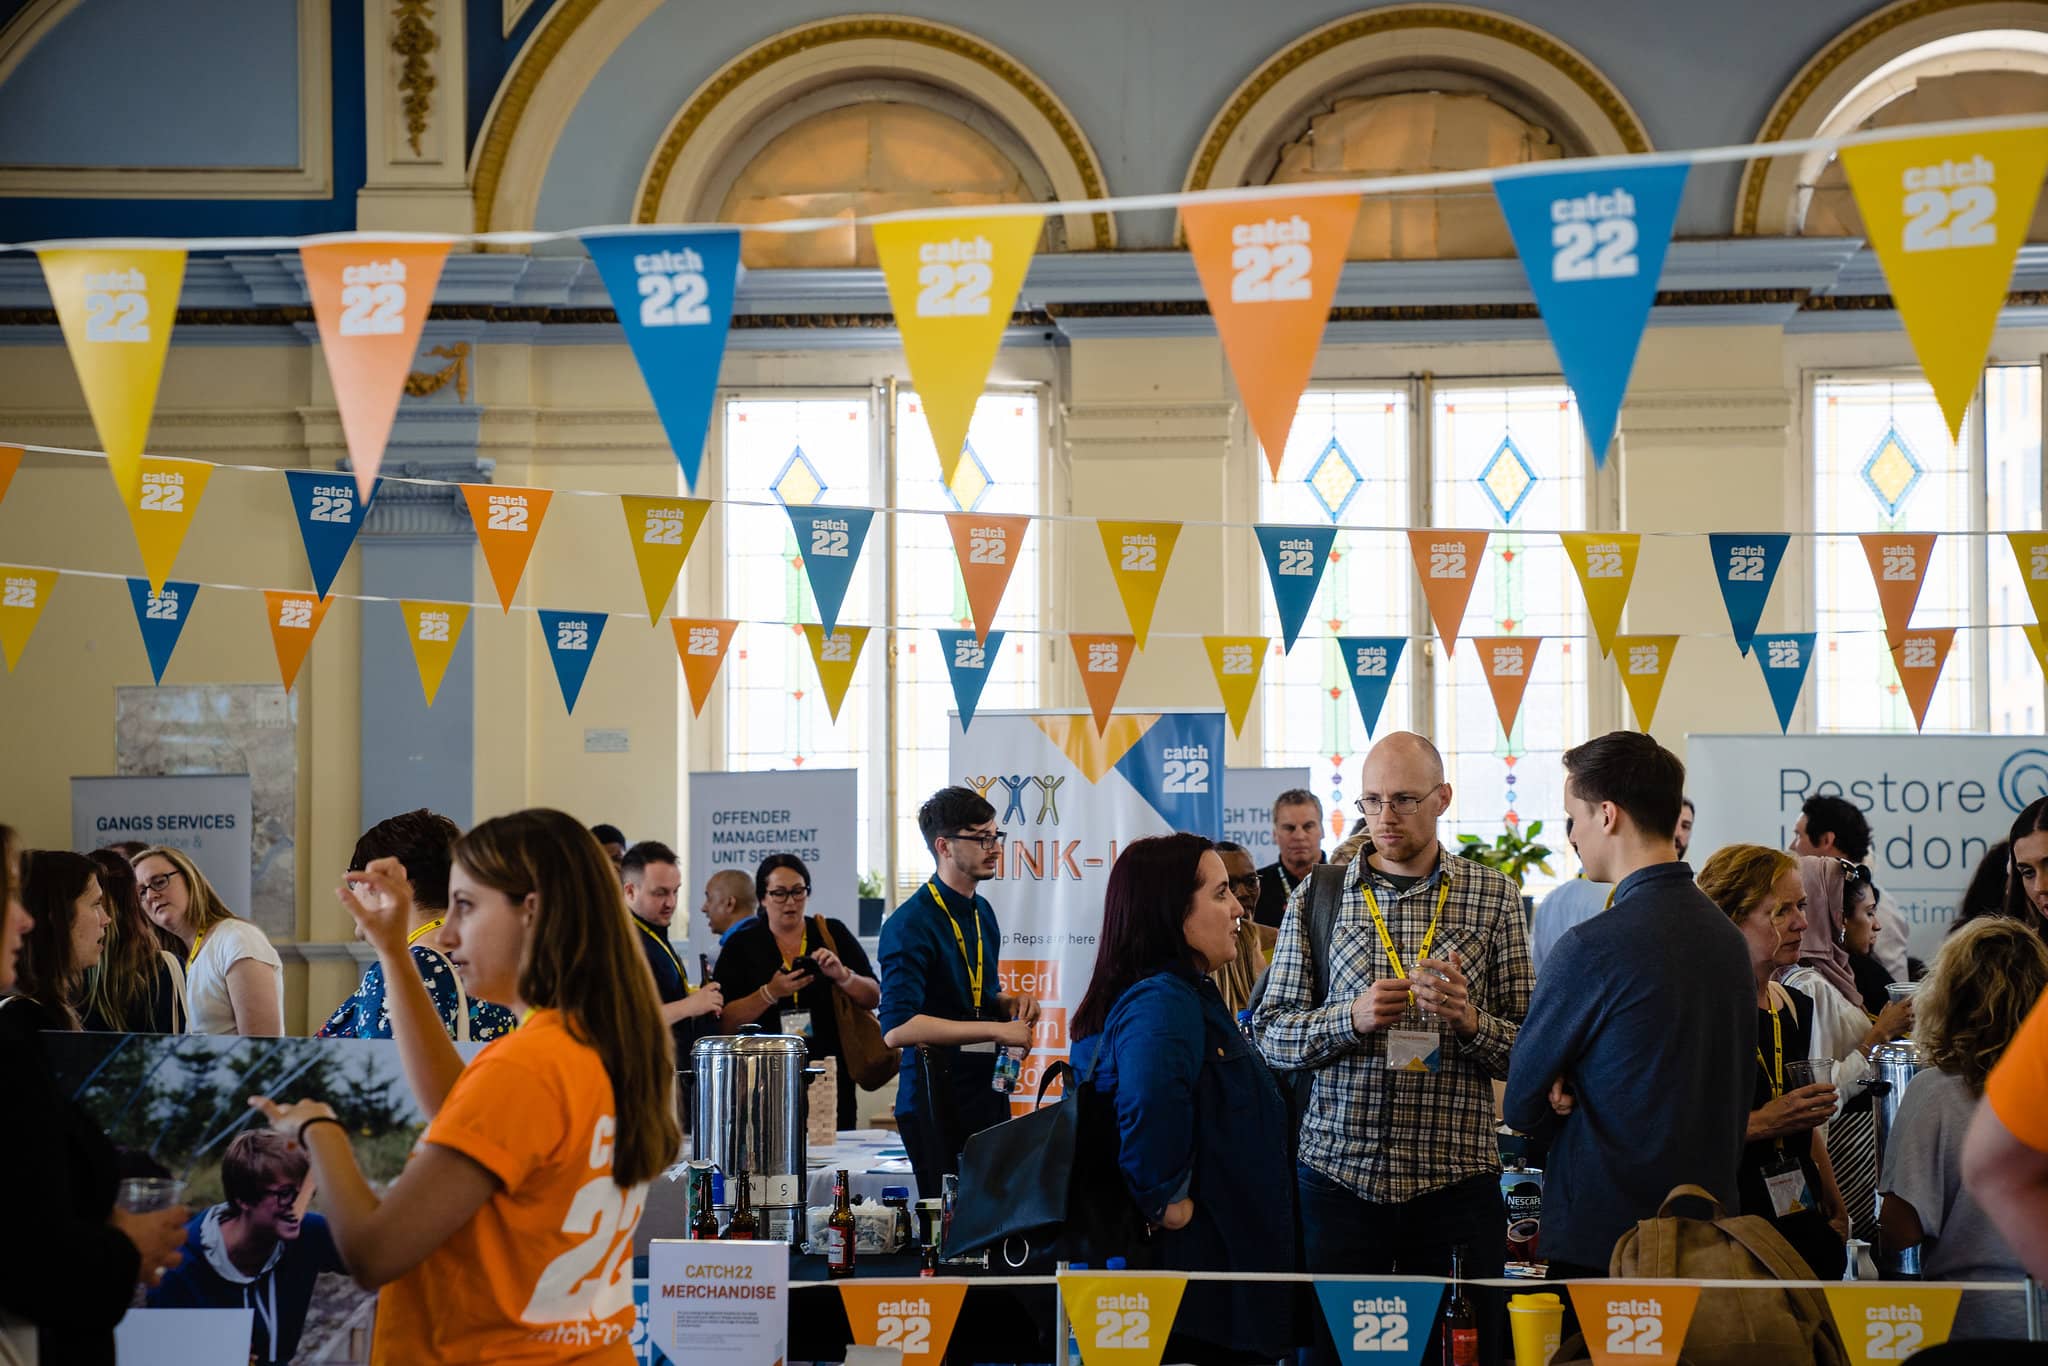 People gather around stands at an event, networking with their colleagues. Above them is Catch22-branded bunting.